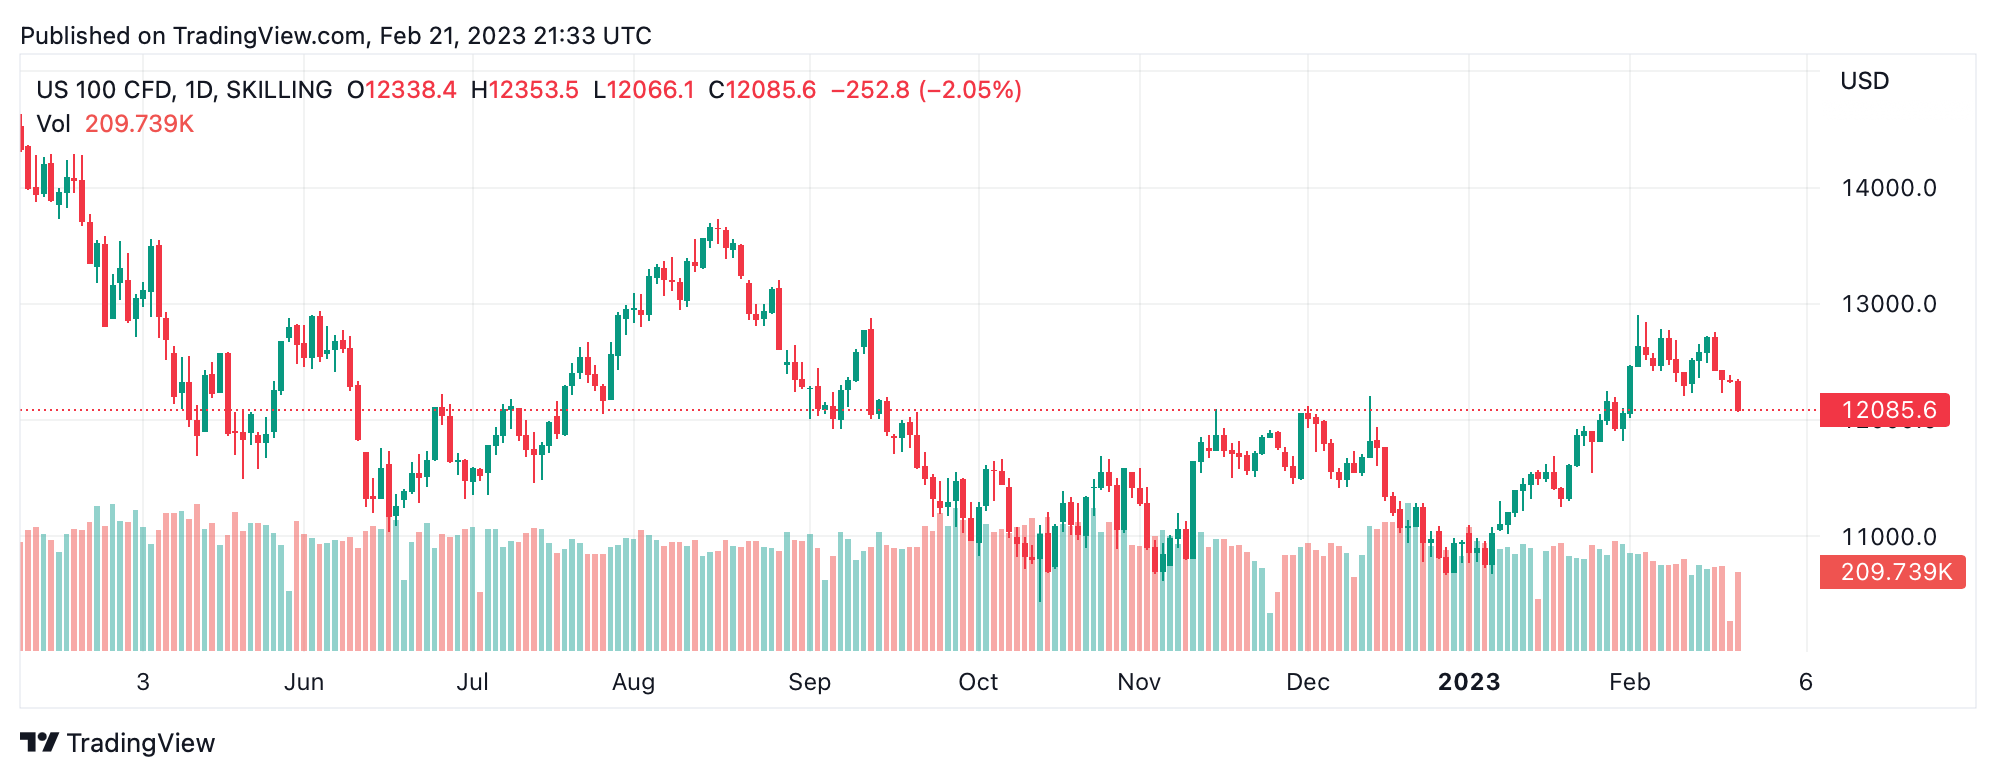 US Markets Fall as Real Estate Weakens, Putin Suspends Nuclear Deal, Morgan Stanley Warns of Stock Market 'Death Zone'